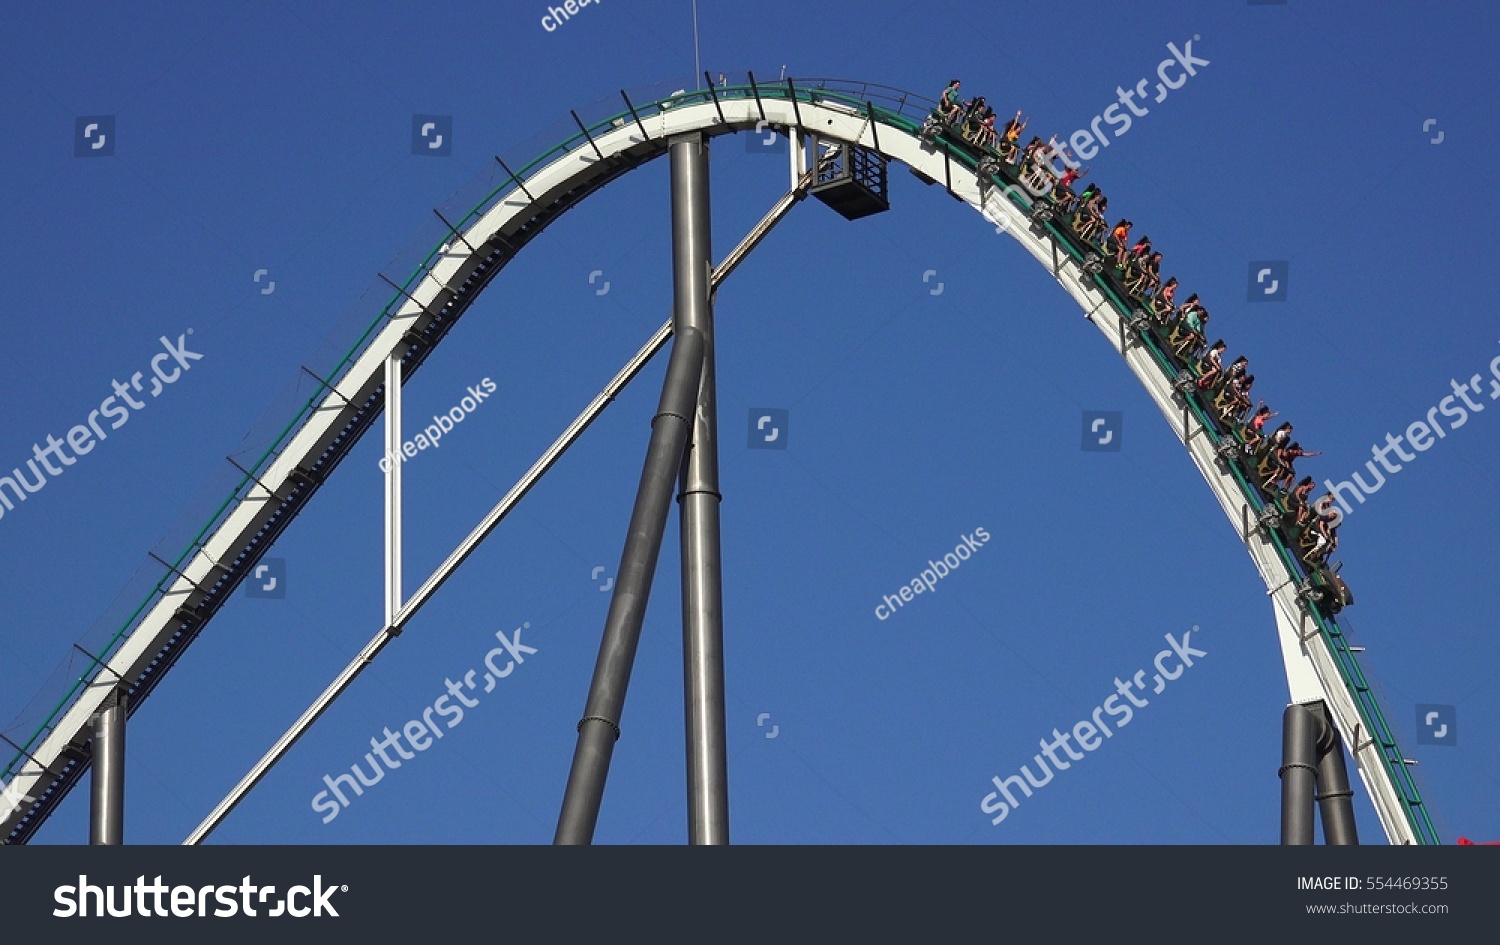 SALOU, SPAIN JULY 5 2016: People On Roller Coaster Thrill Ride on July 5 2016 in Salou, Spain #554469355